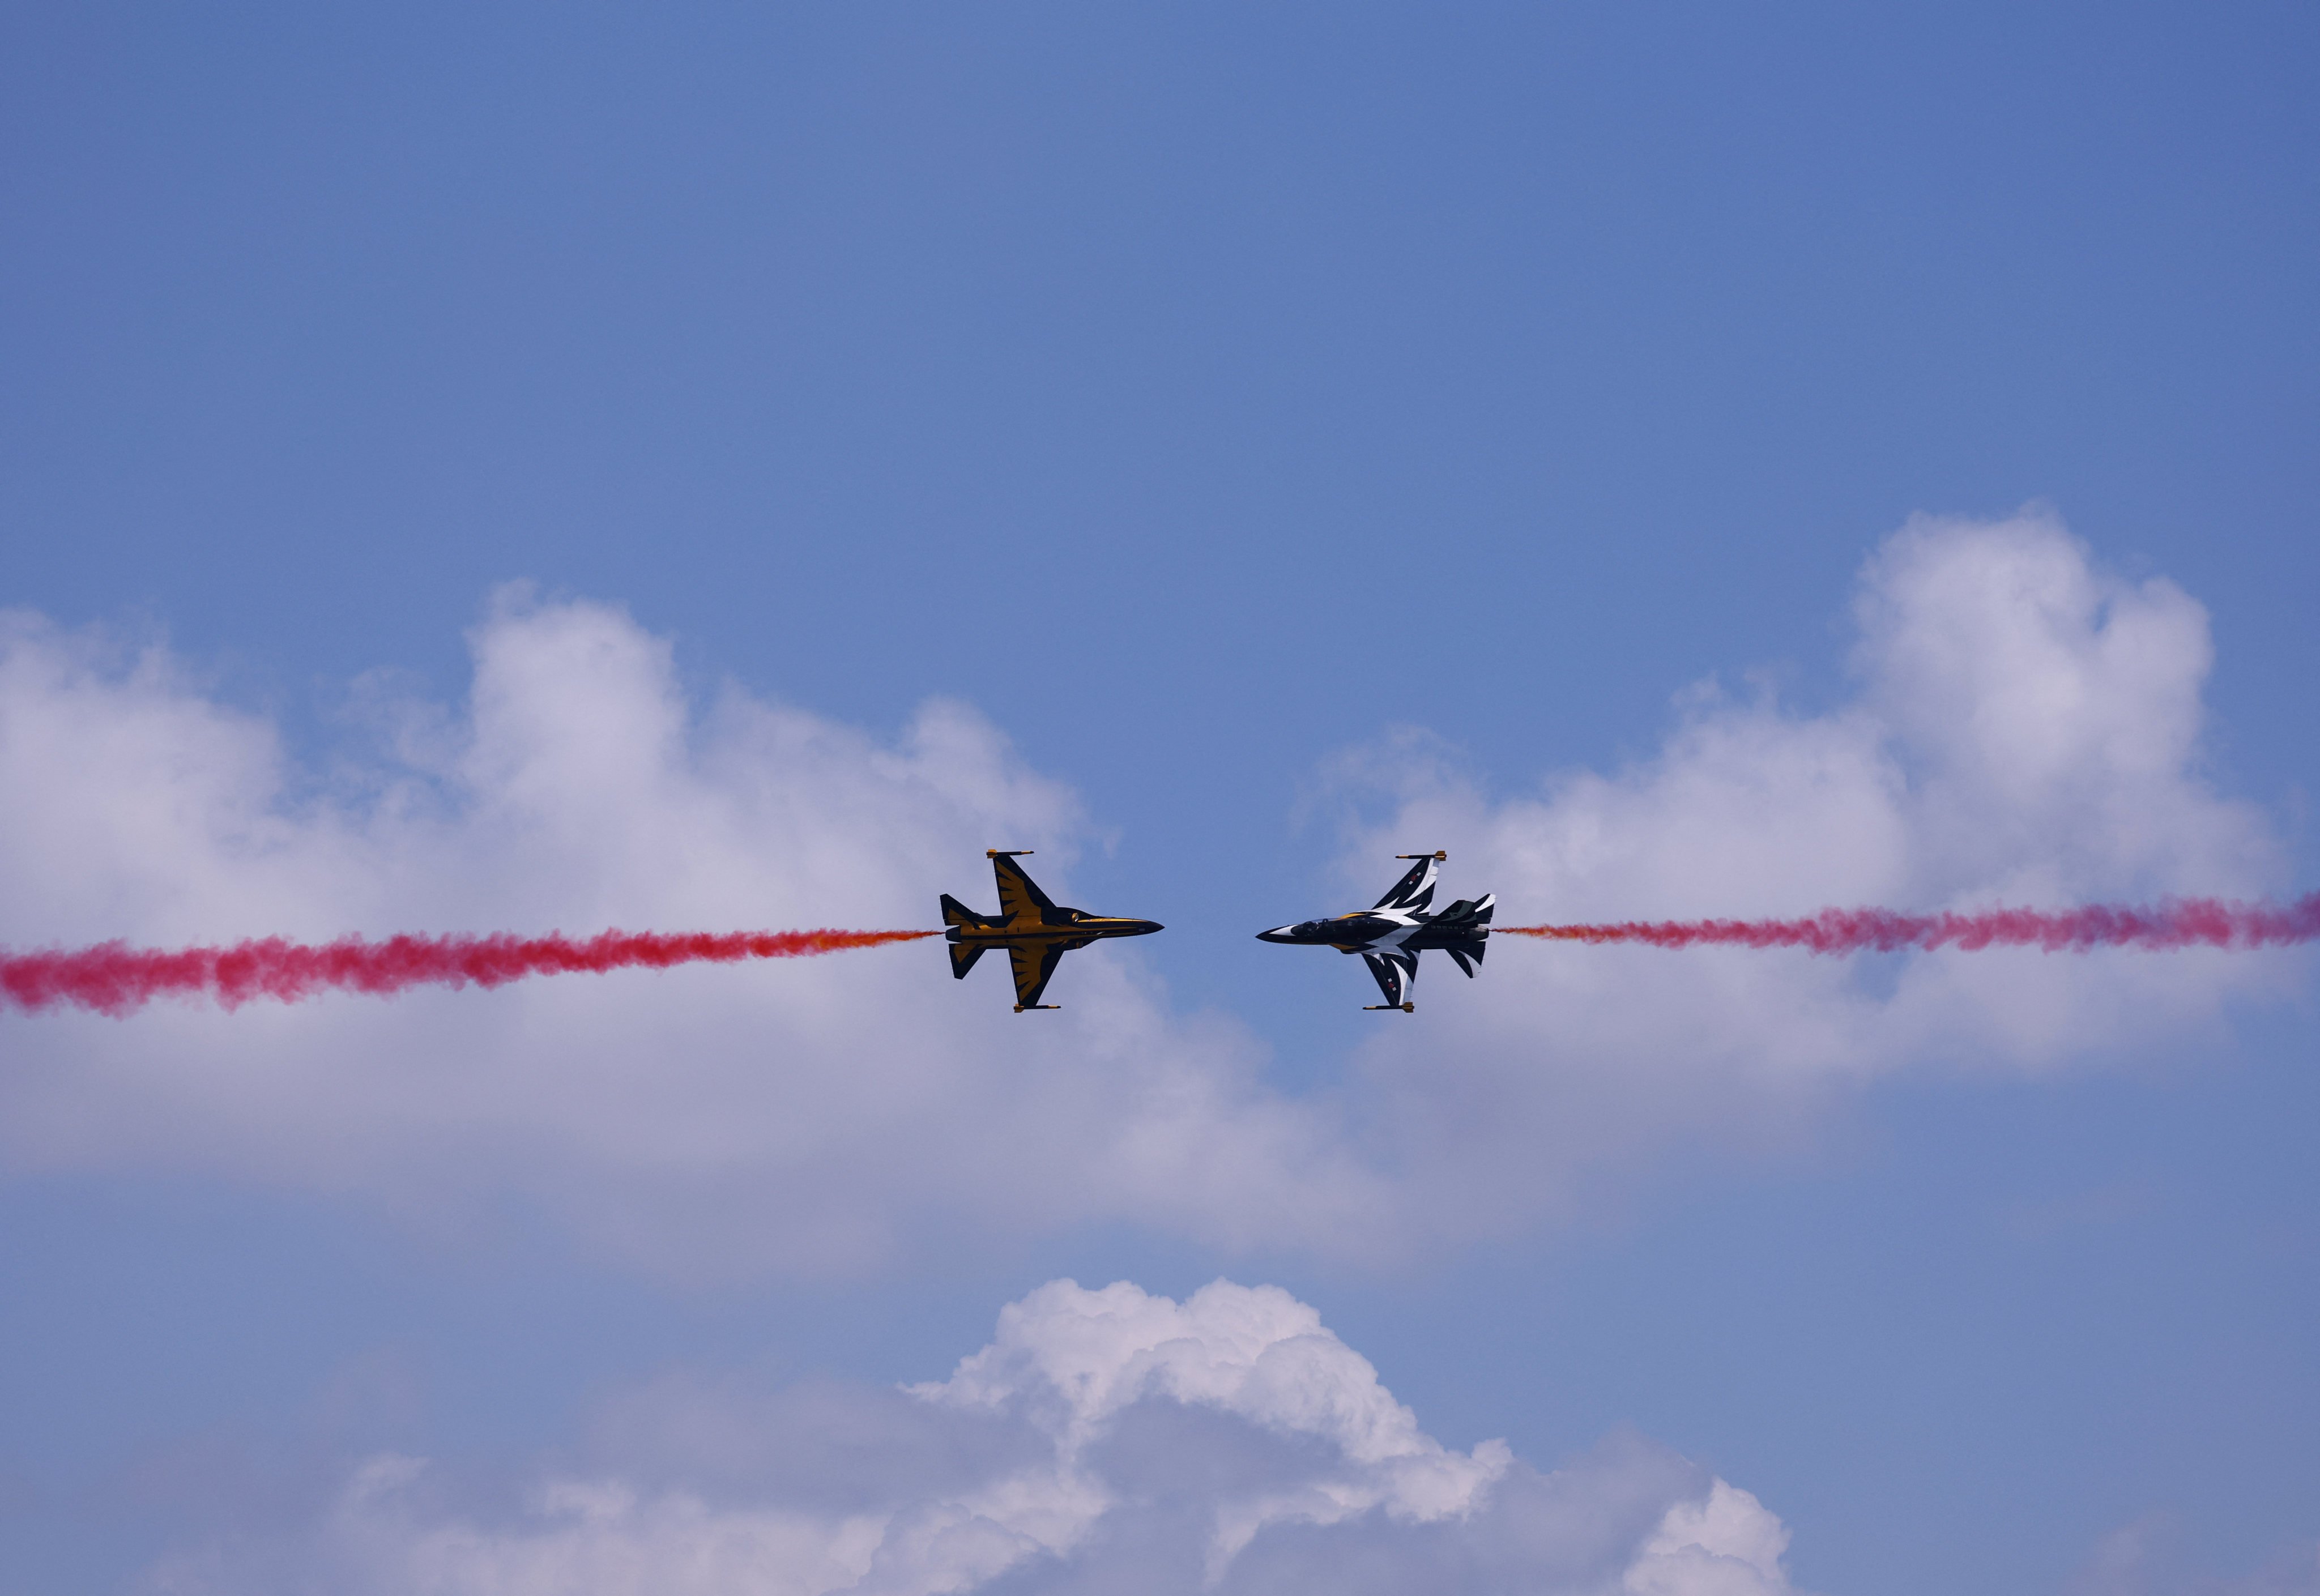 South Korea’s Black Eagles aerobatic team perform at Changi Exhibition Centre during an aerial flying display on Sunday ahead of the Singapore Airshow’s opening. Photo: Reuters